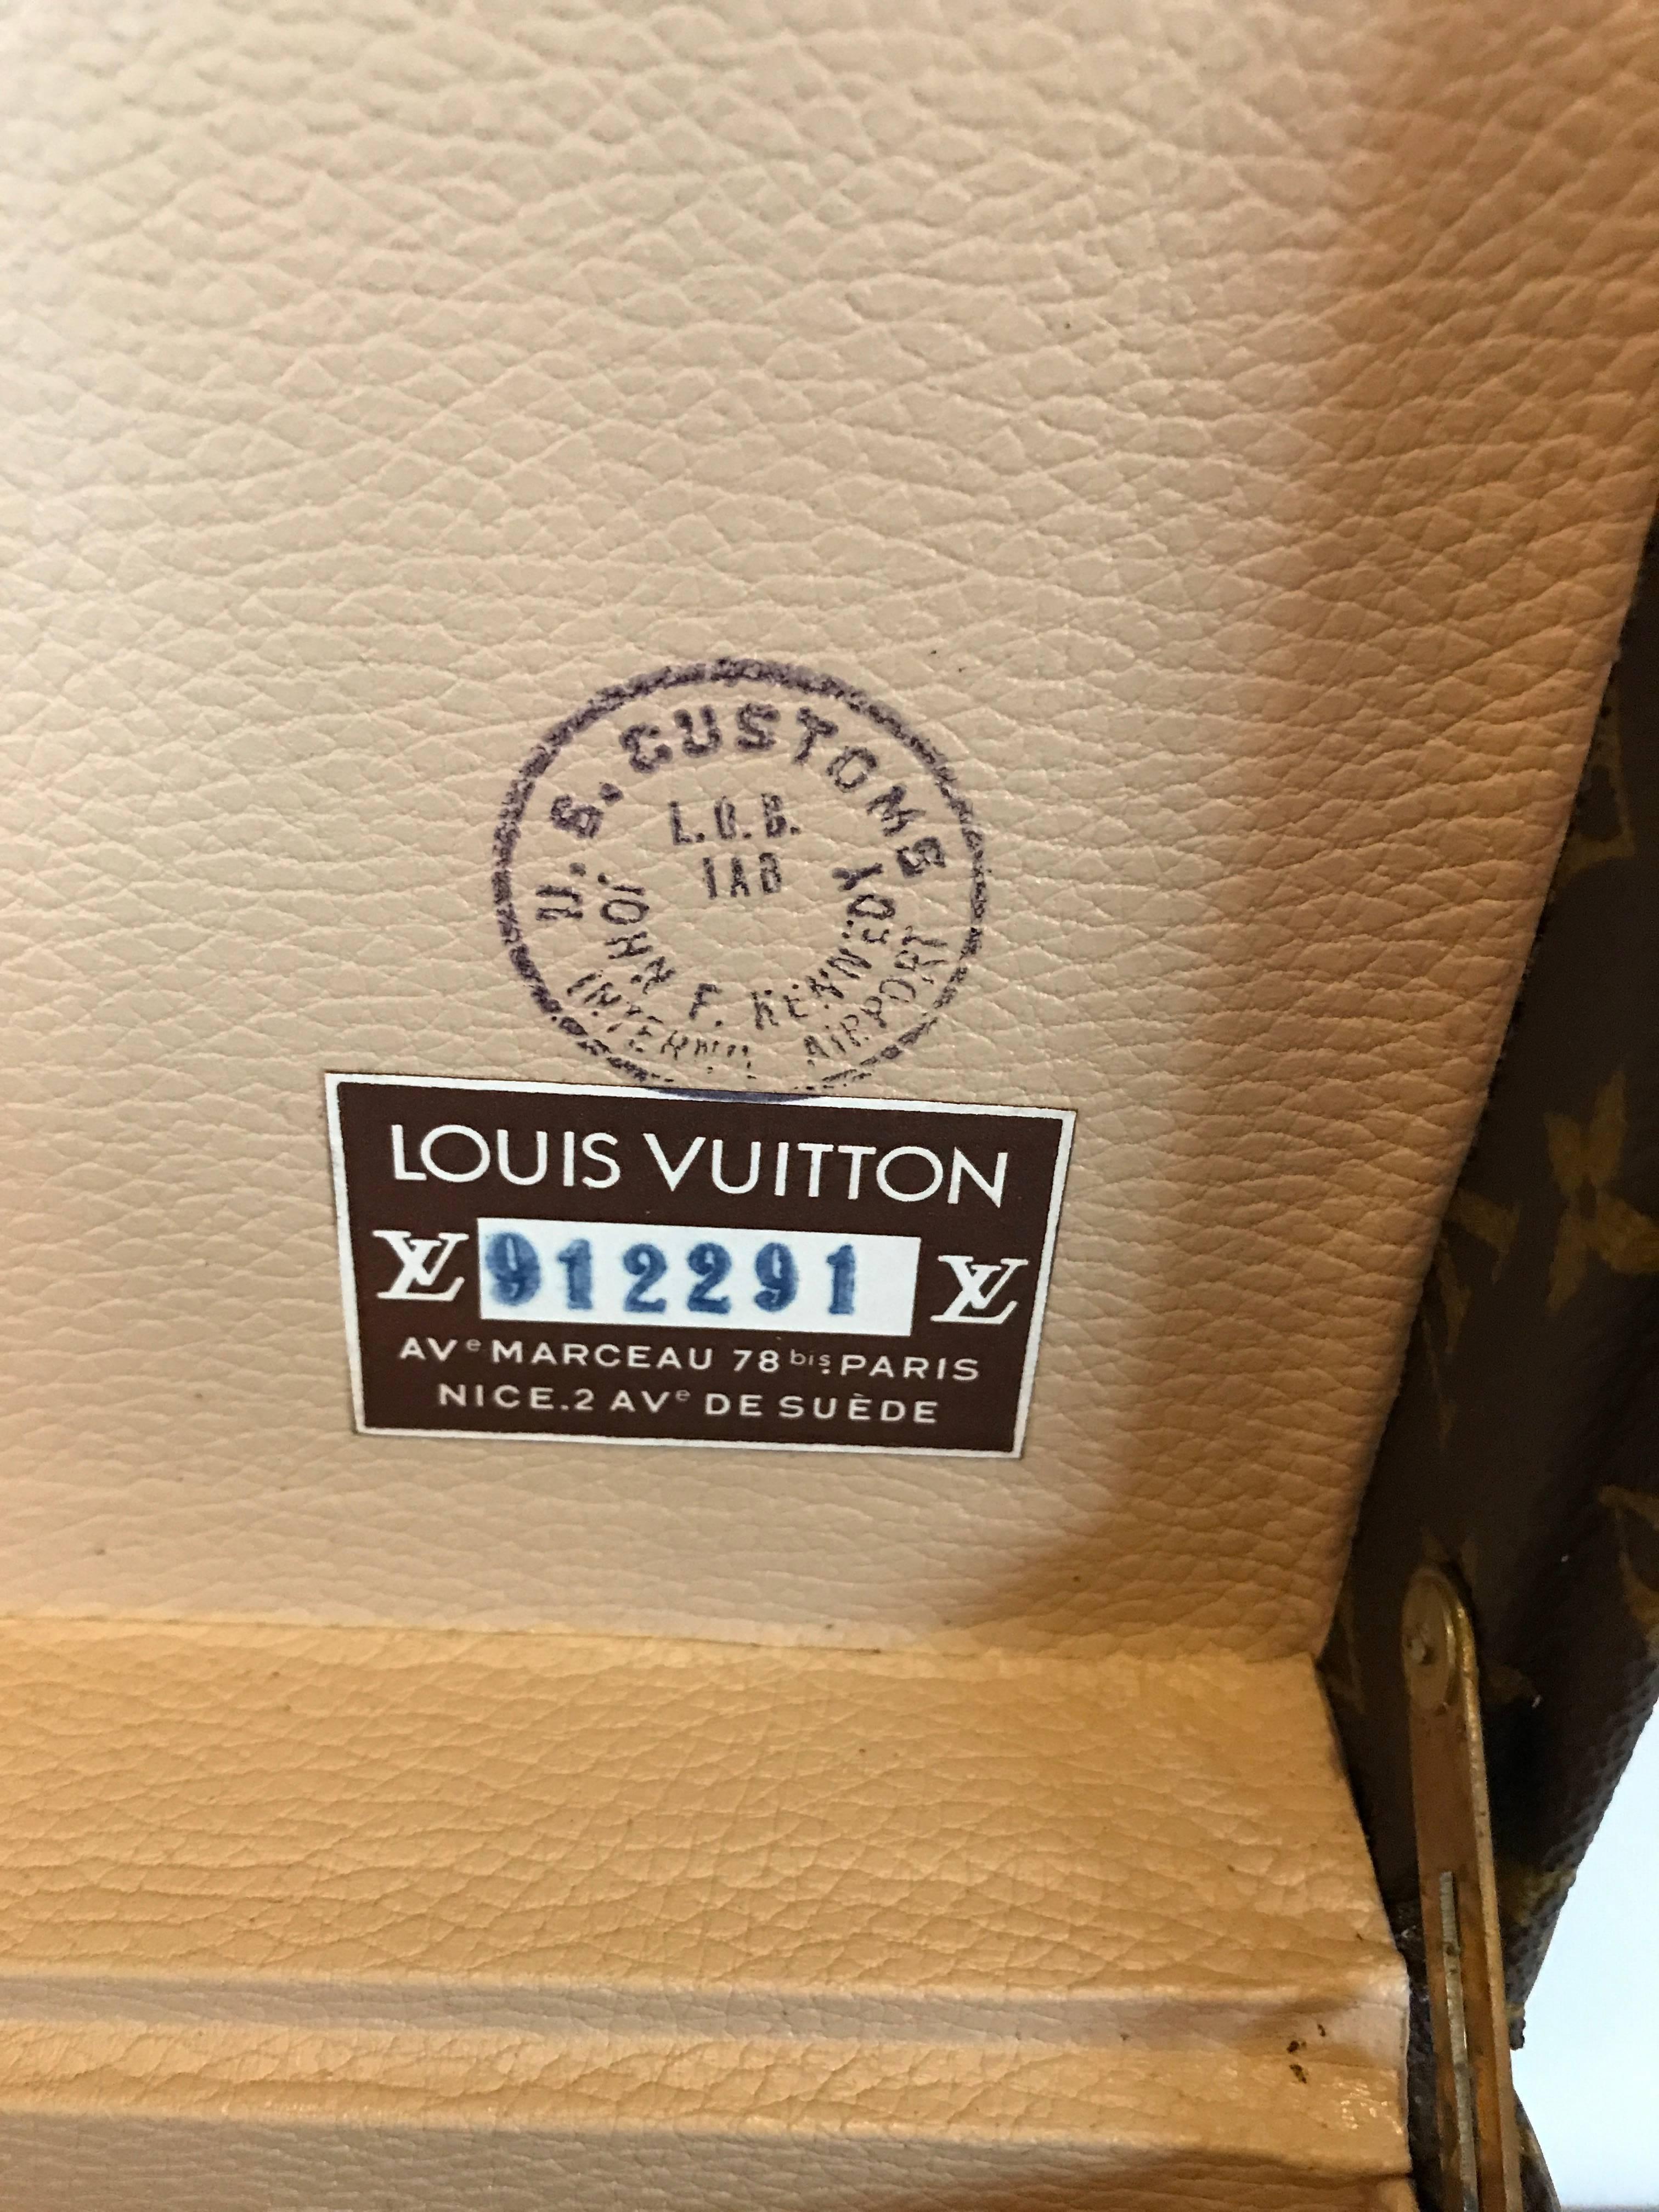 Louis Vuitton Monogram Hard Sided Suitcase. No. 912291 In Good Condition In Stamford, CT